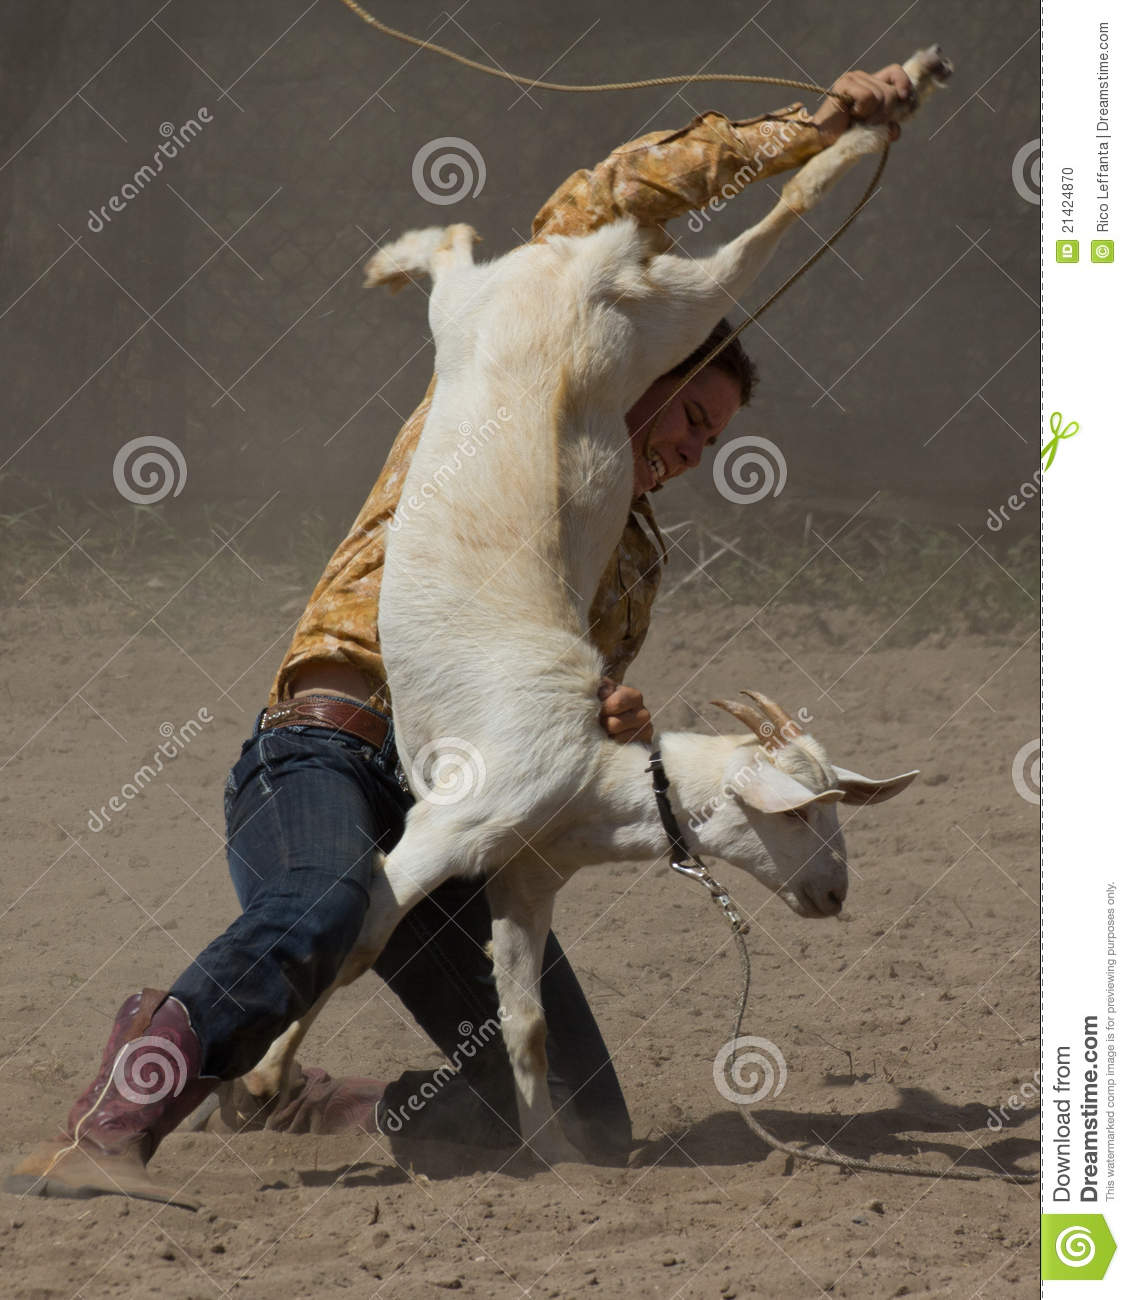 Getting Your Goat Editorial Image   Image  21424870